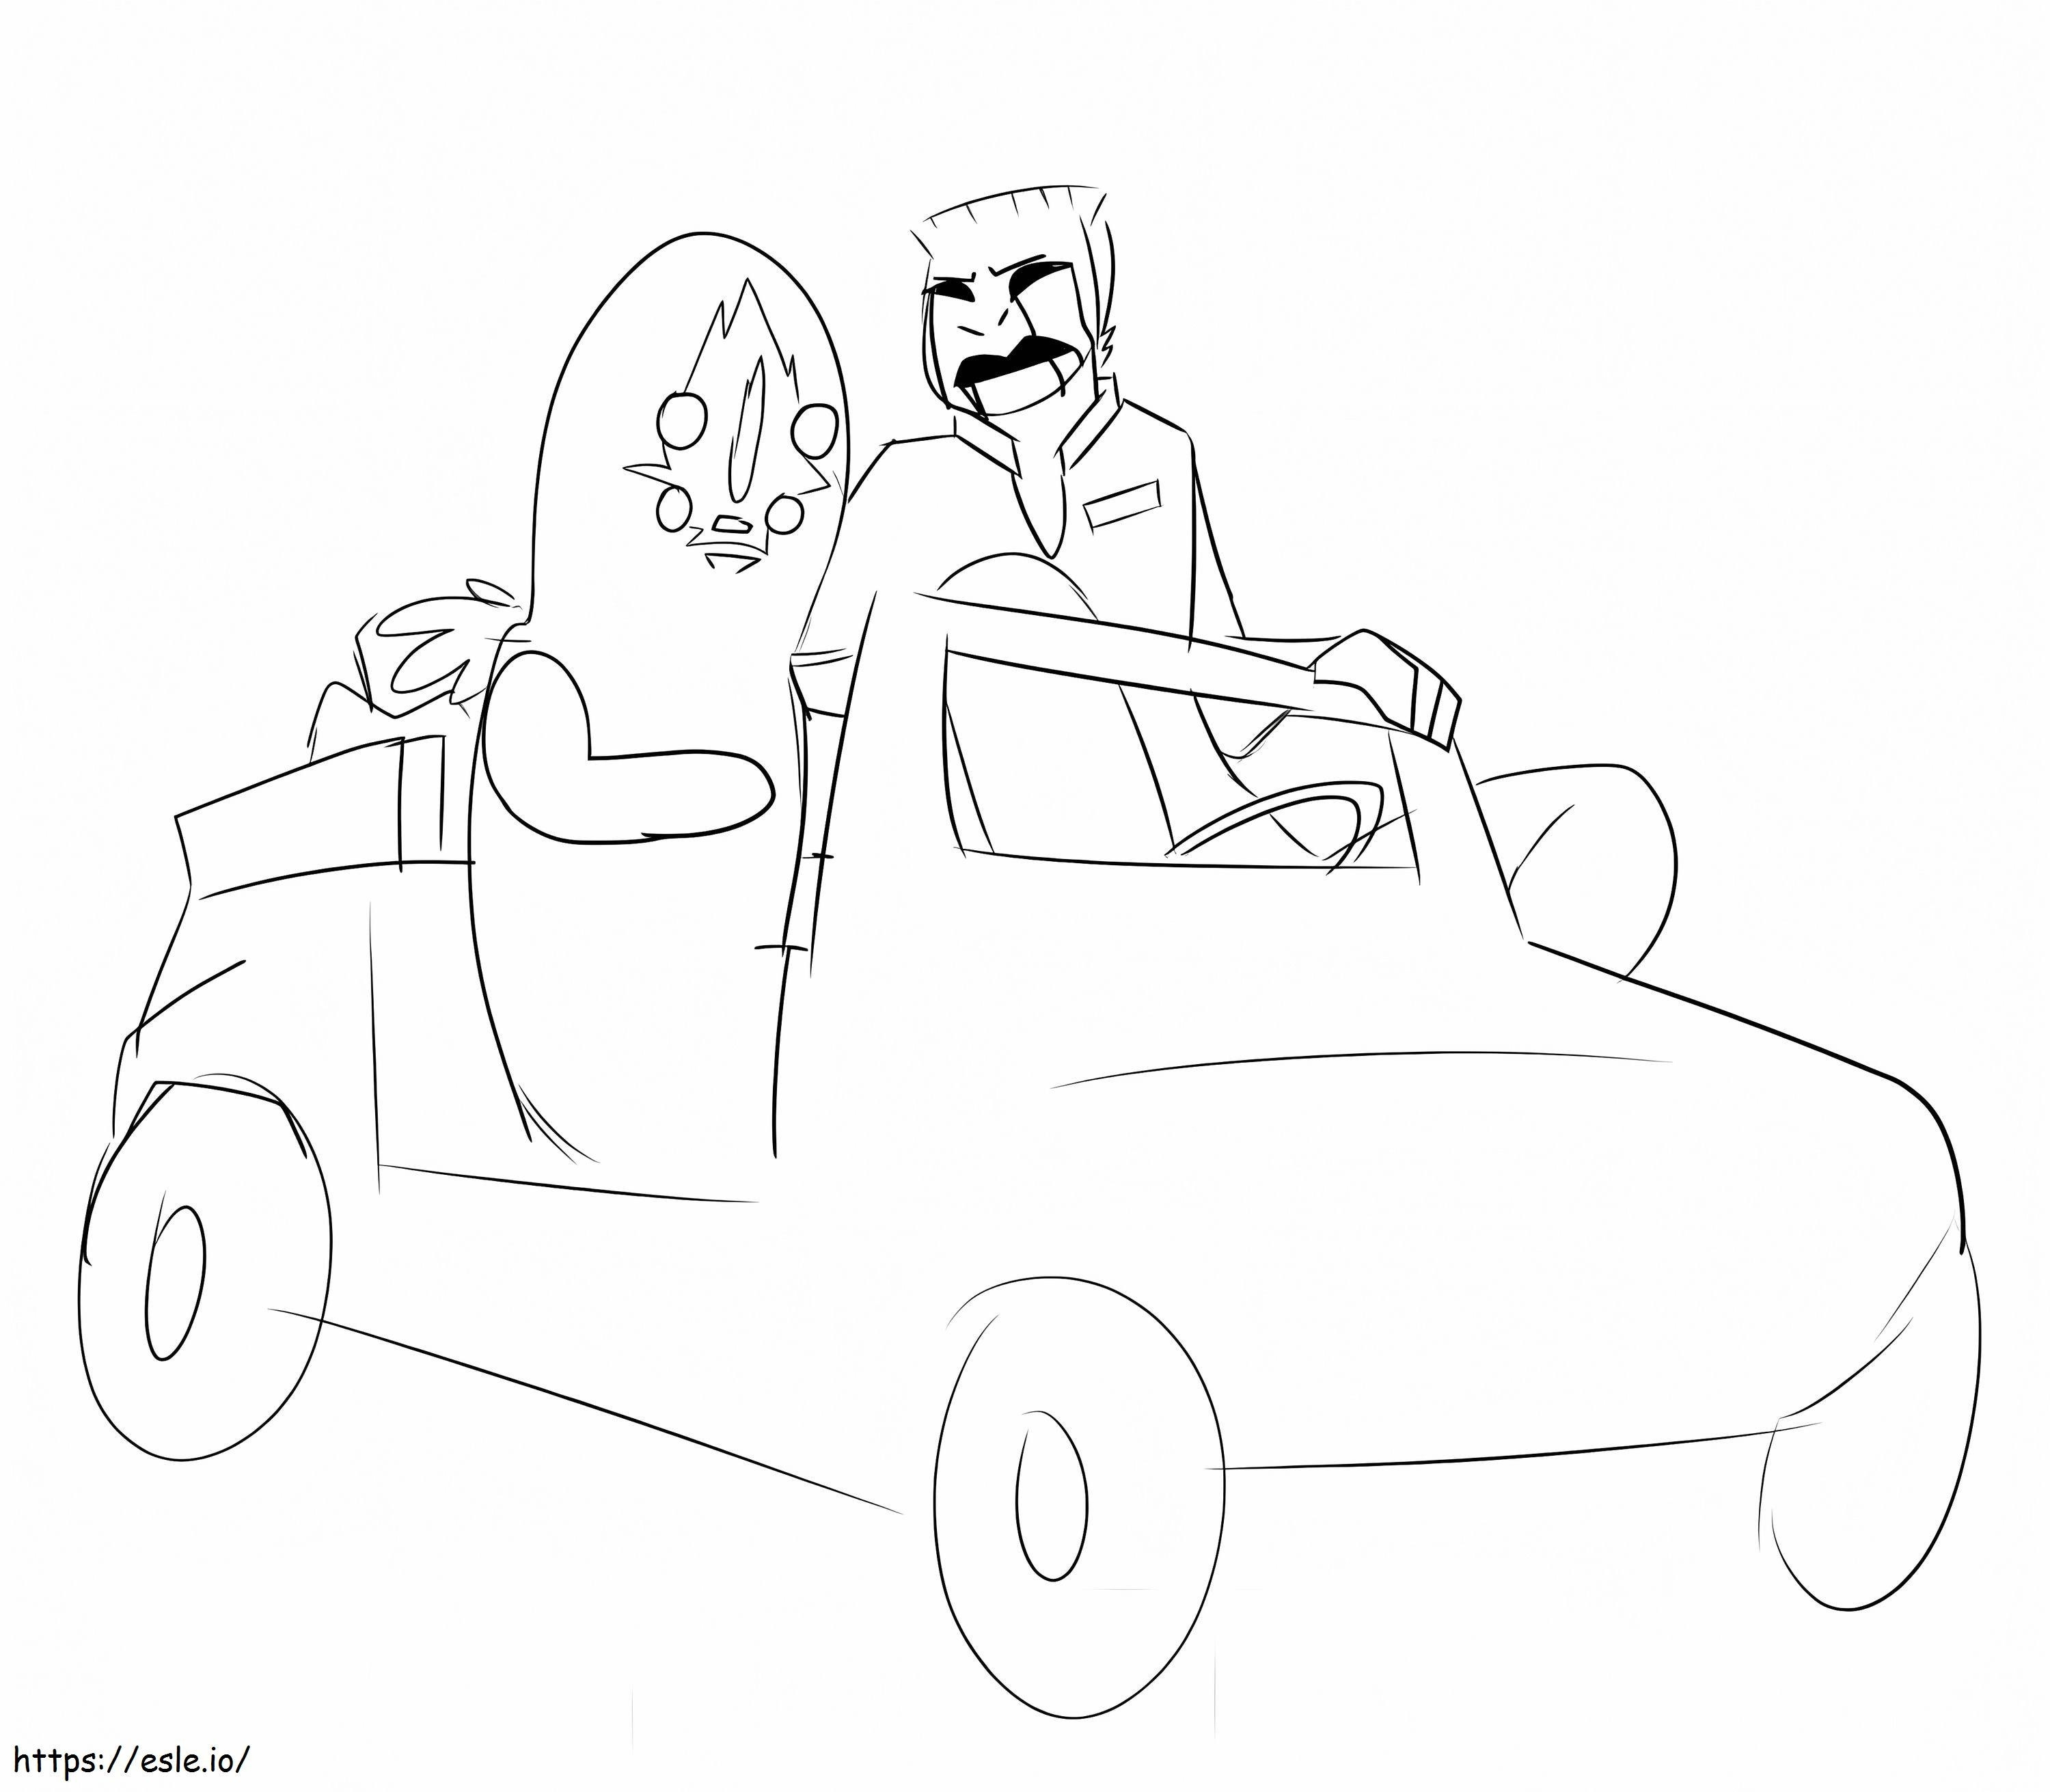 Scp 173 In The Car coloring page